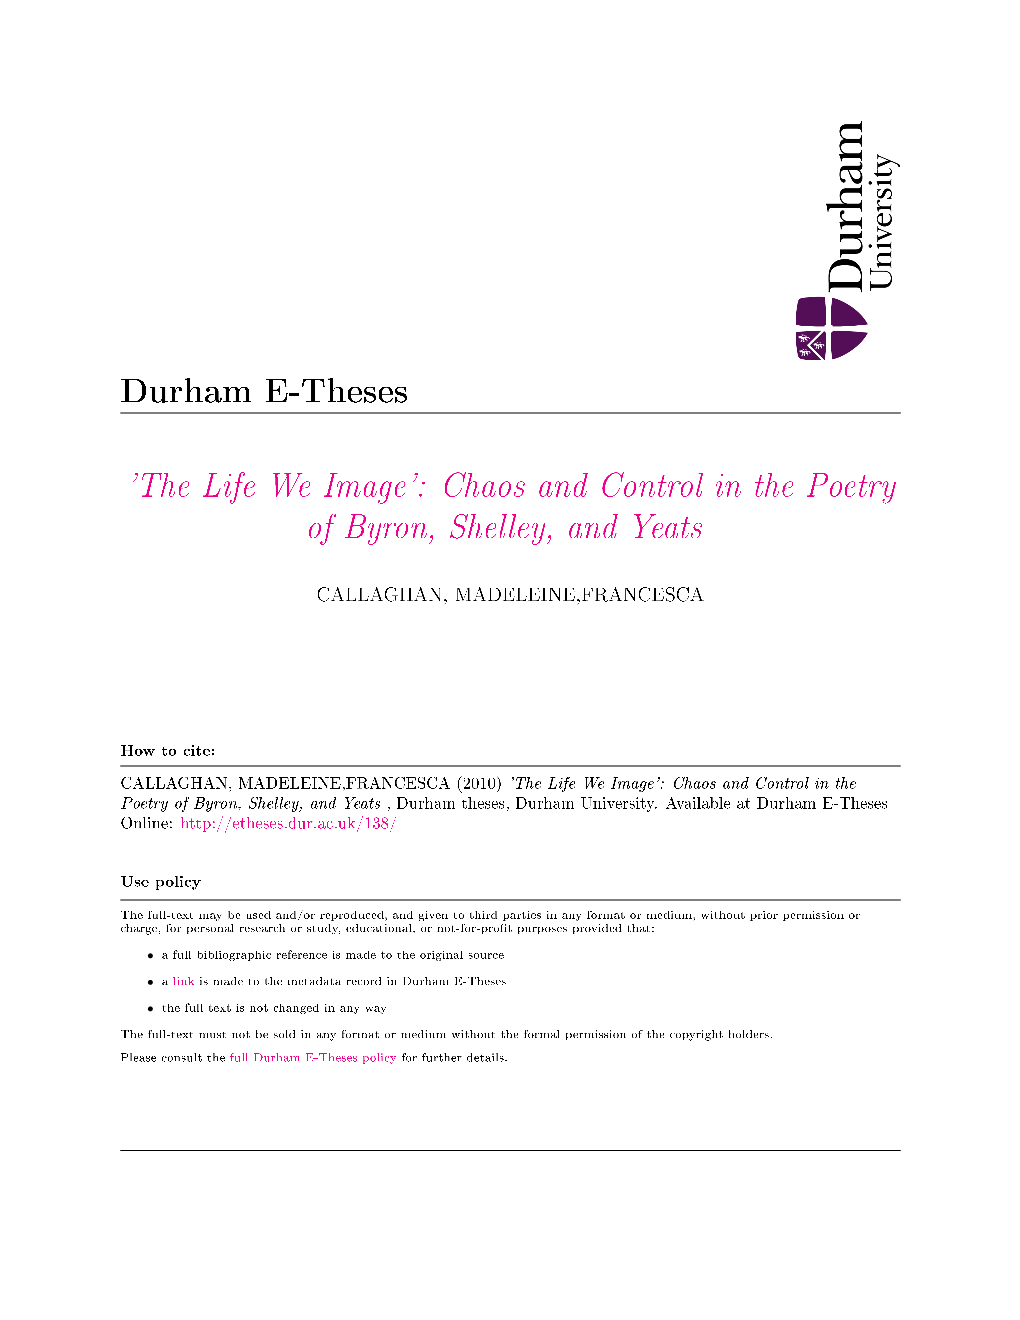 Chaos and Control in the Poetry of Byron, Shelley, and Yeats